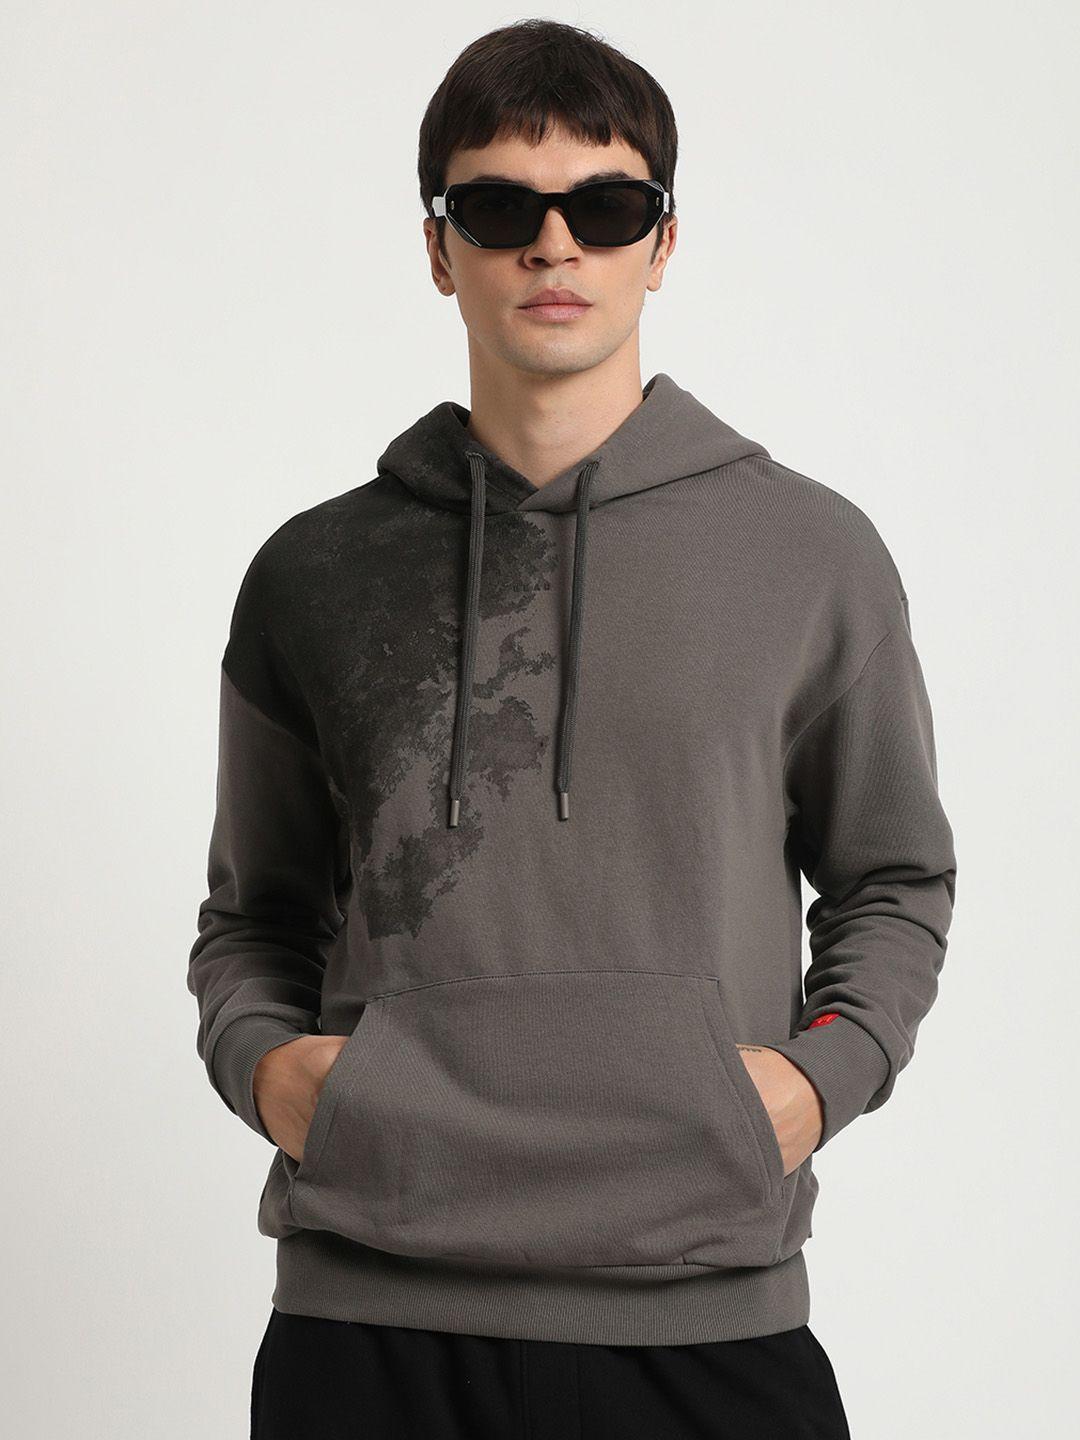 the bear house abstract printed hooded pure cotton pullover sweatshirt